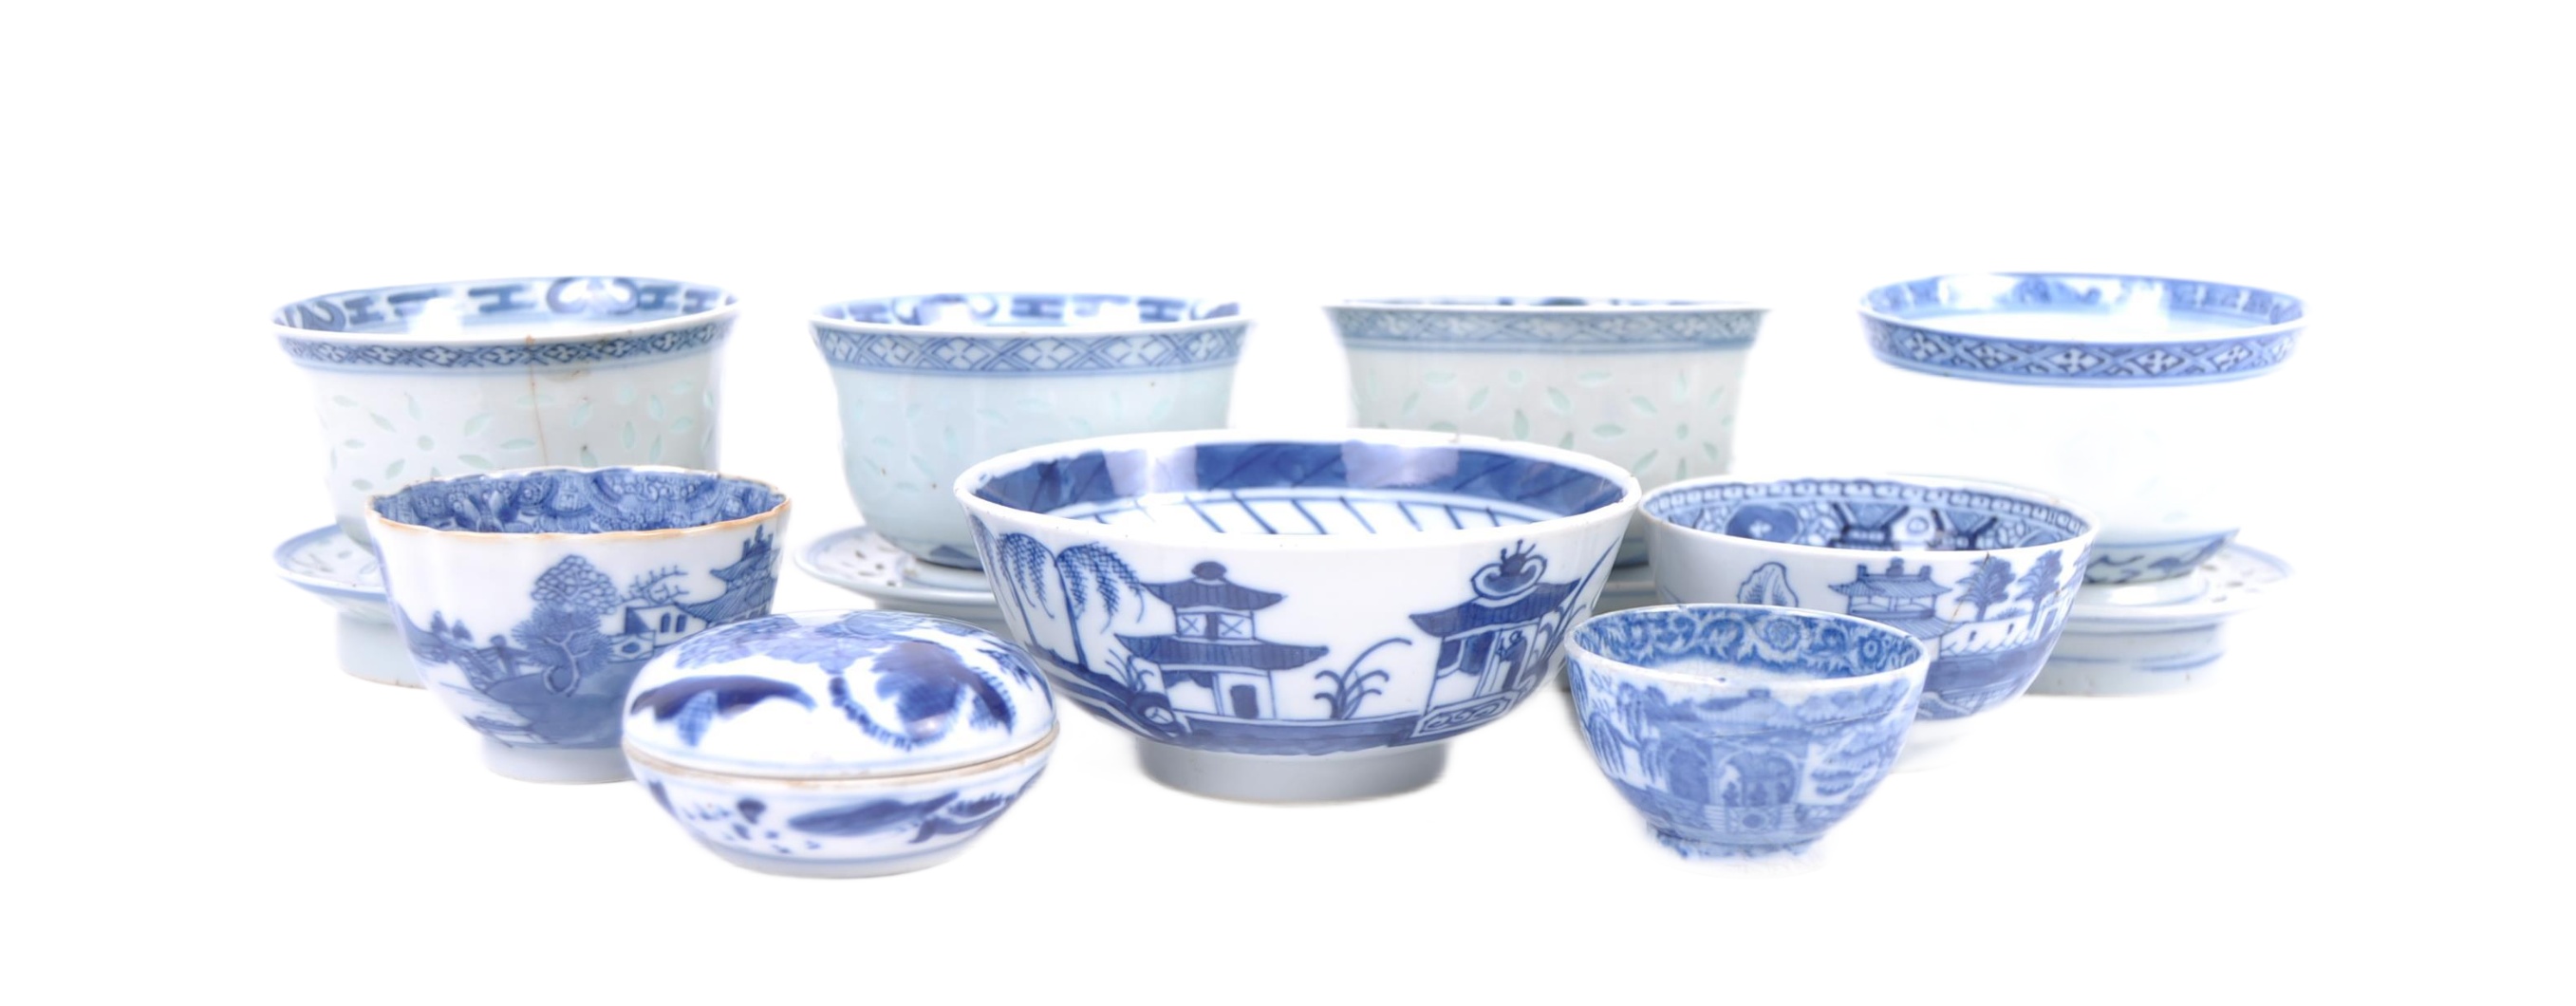 COLLECTION OF CHINESE BLUE & WHITE PORCELAIN